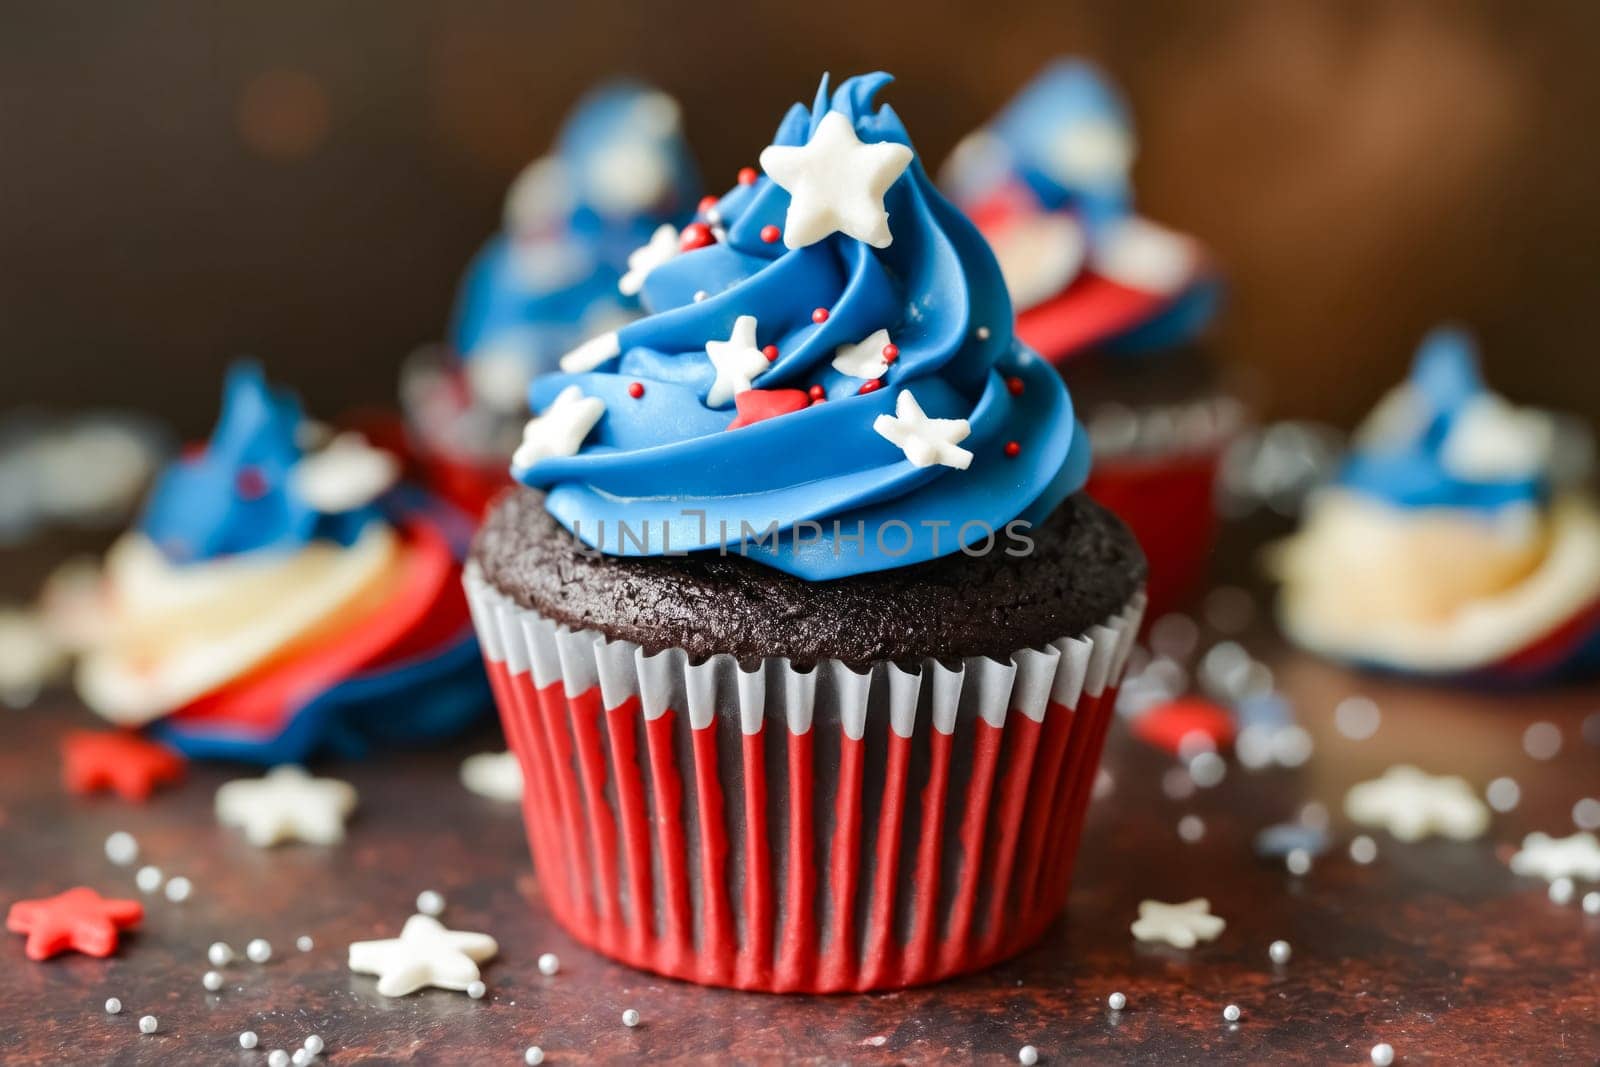 A cupcake with blue frosting and red stars on top. The cupcake is decorated with patriotic colors and stars, making it a festive treat for the Fourth of July. Generative AI